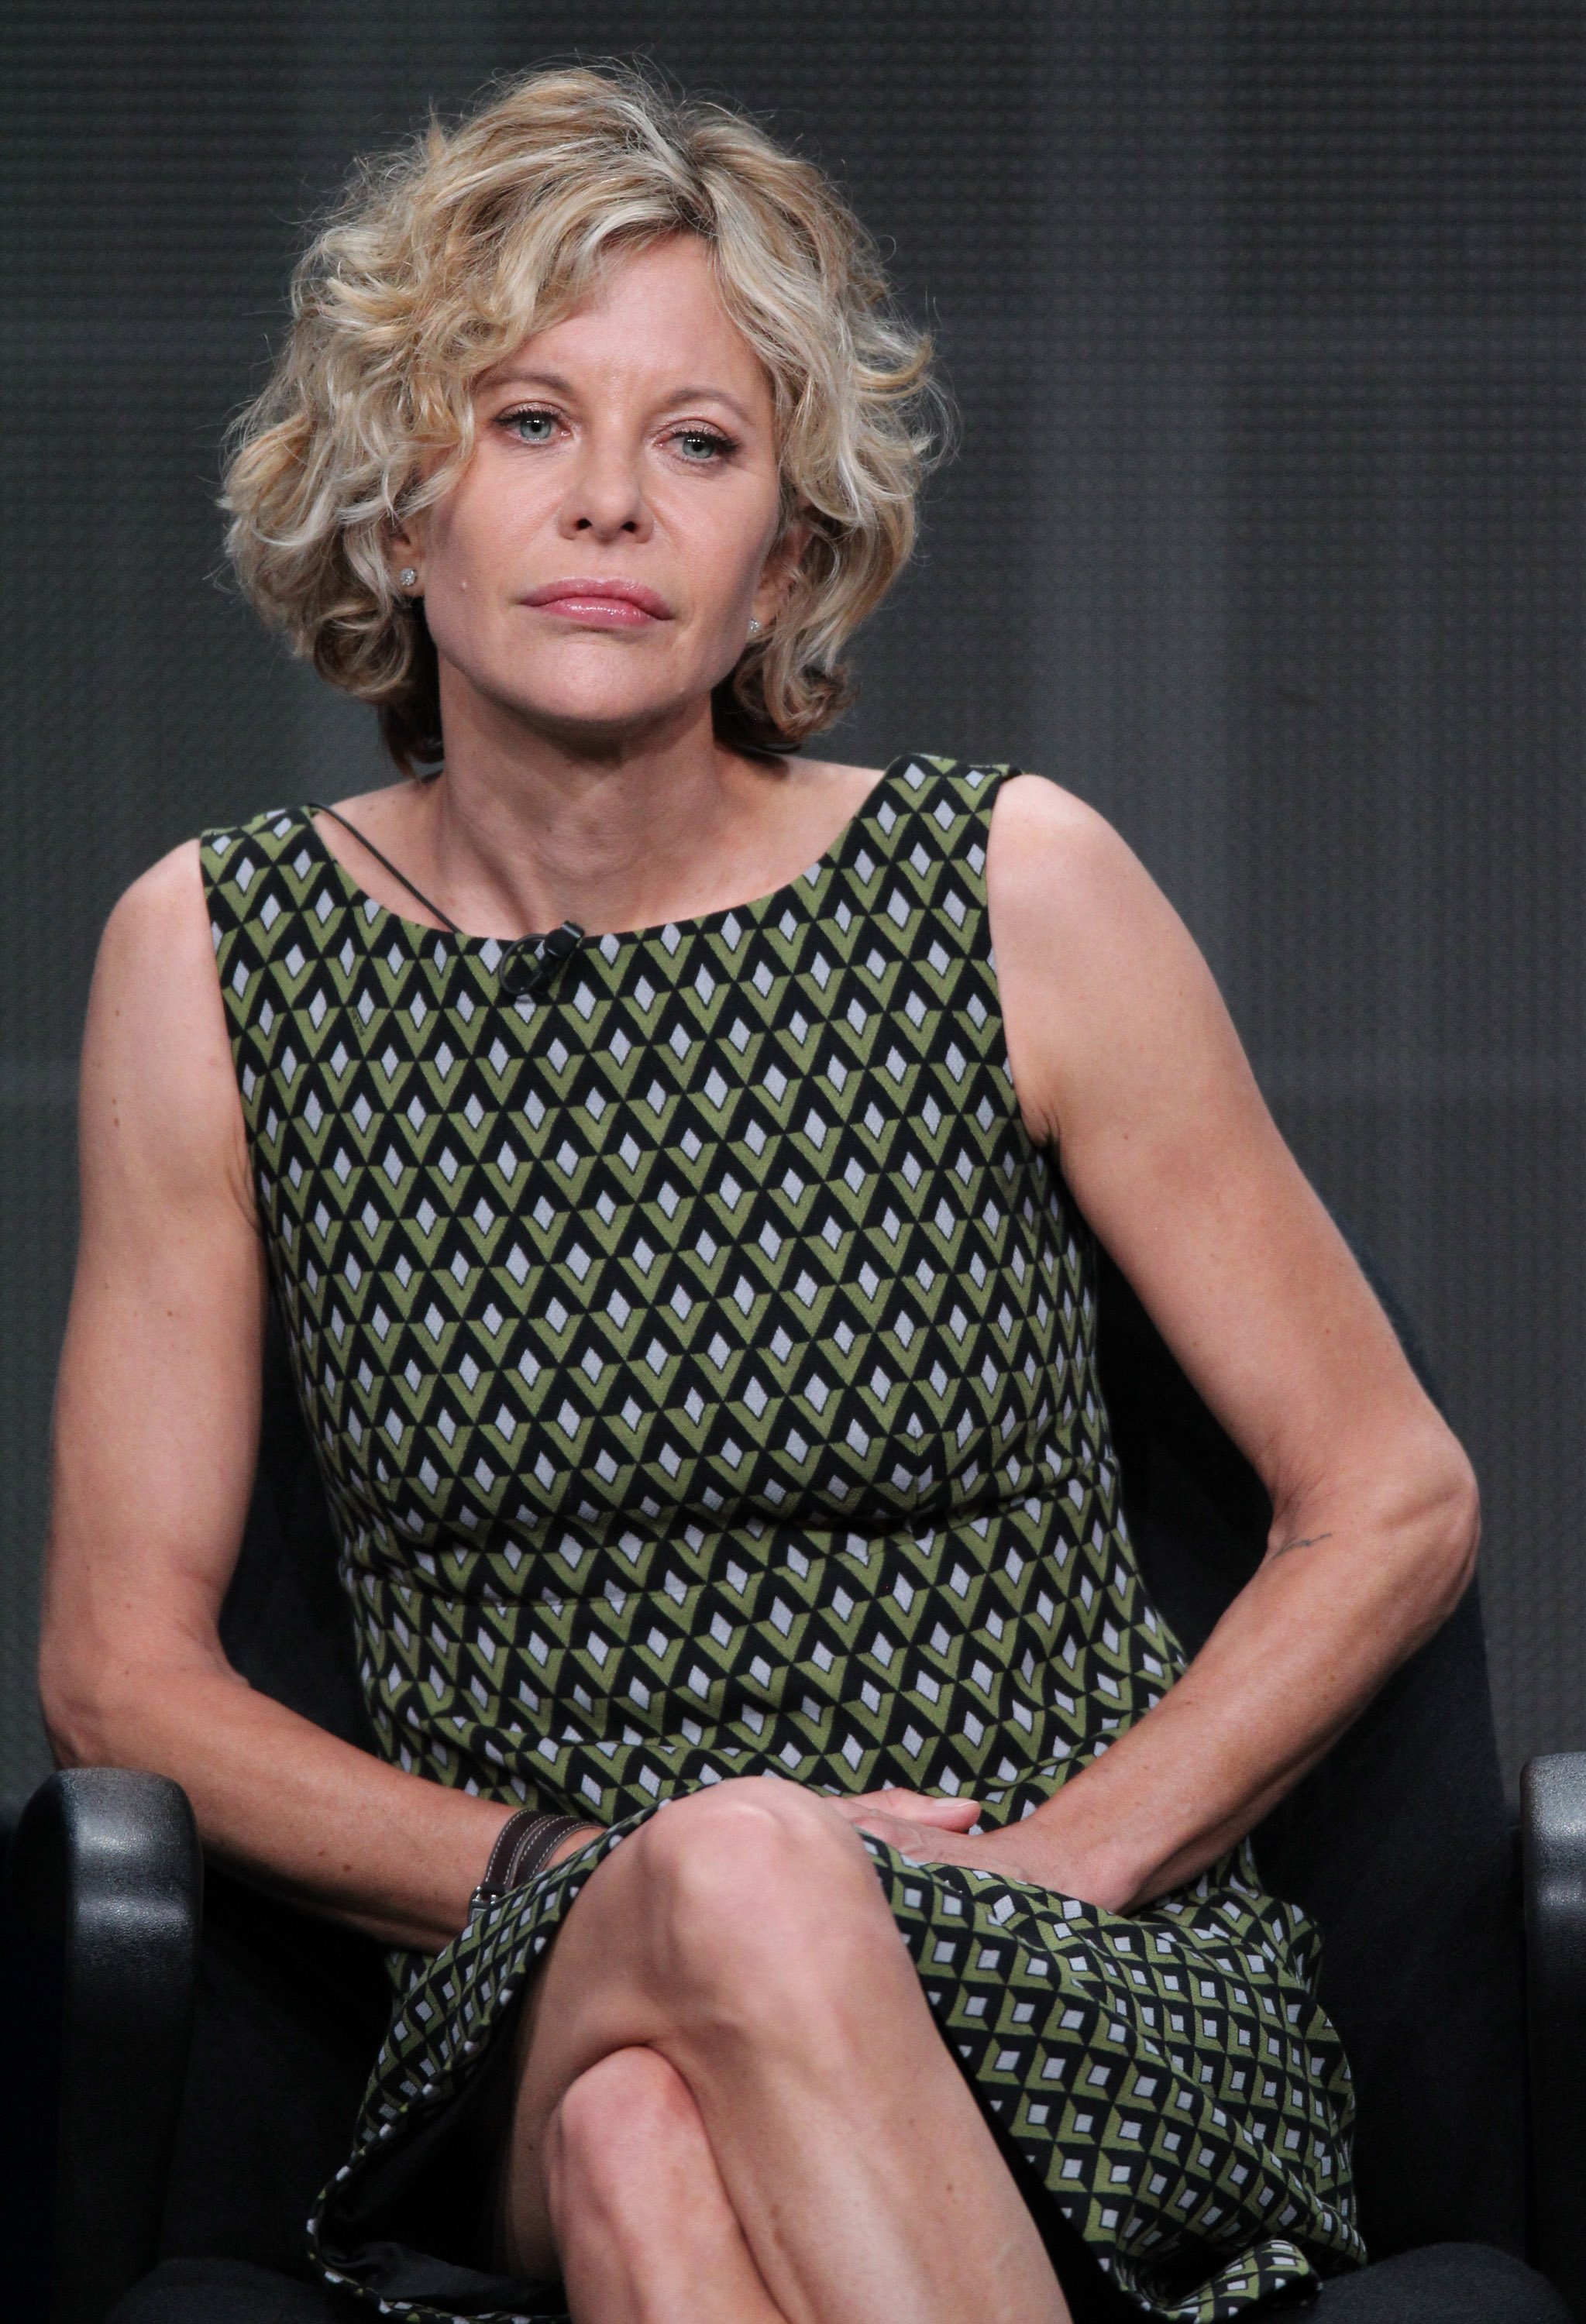 Meg Ryan speaks onstage at the "Half the Sky, a Special Presentation of Independent Lens" panel during day 2 of the PBS portion of the 2012 Summer TCA Tour at the Beverly Hilton Hotel on July 22, 2012 in Los Angeles, California | Photo: Getty Images